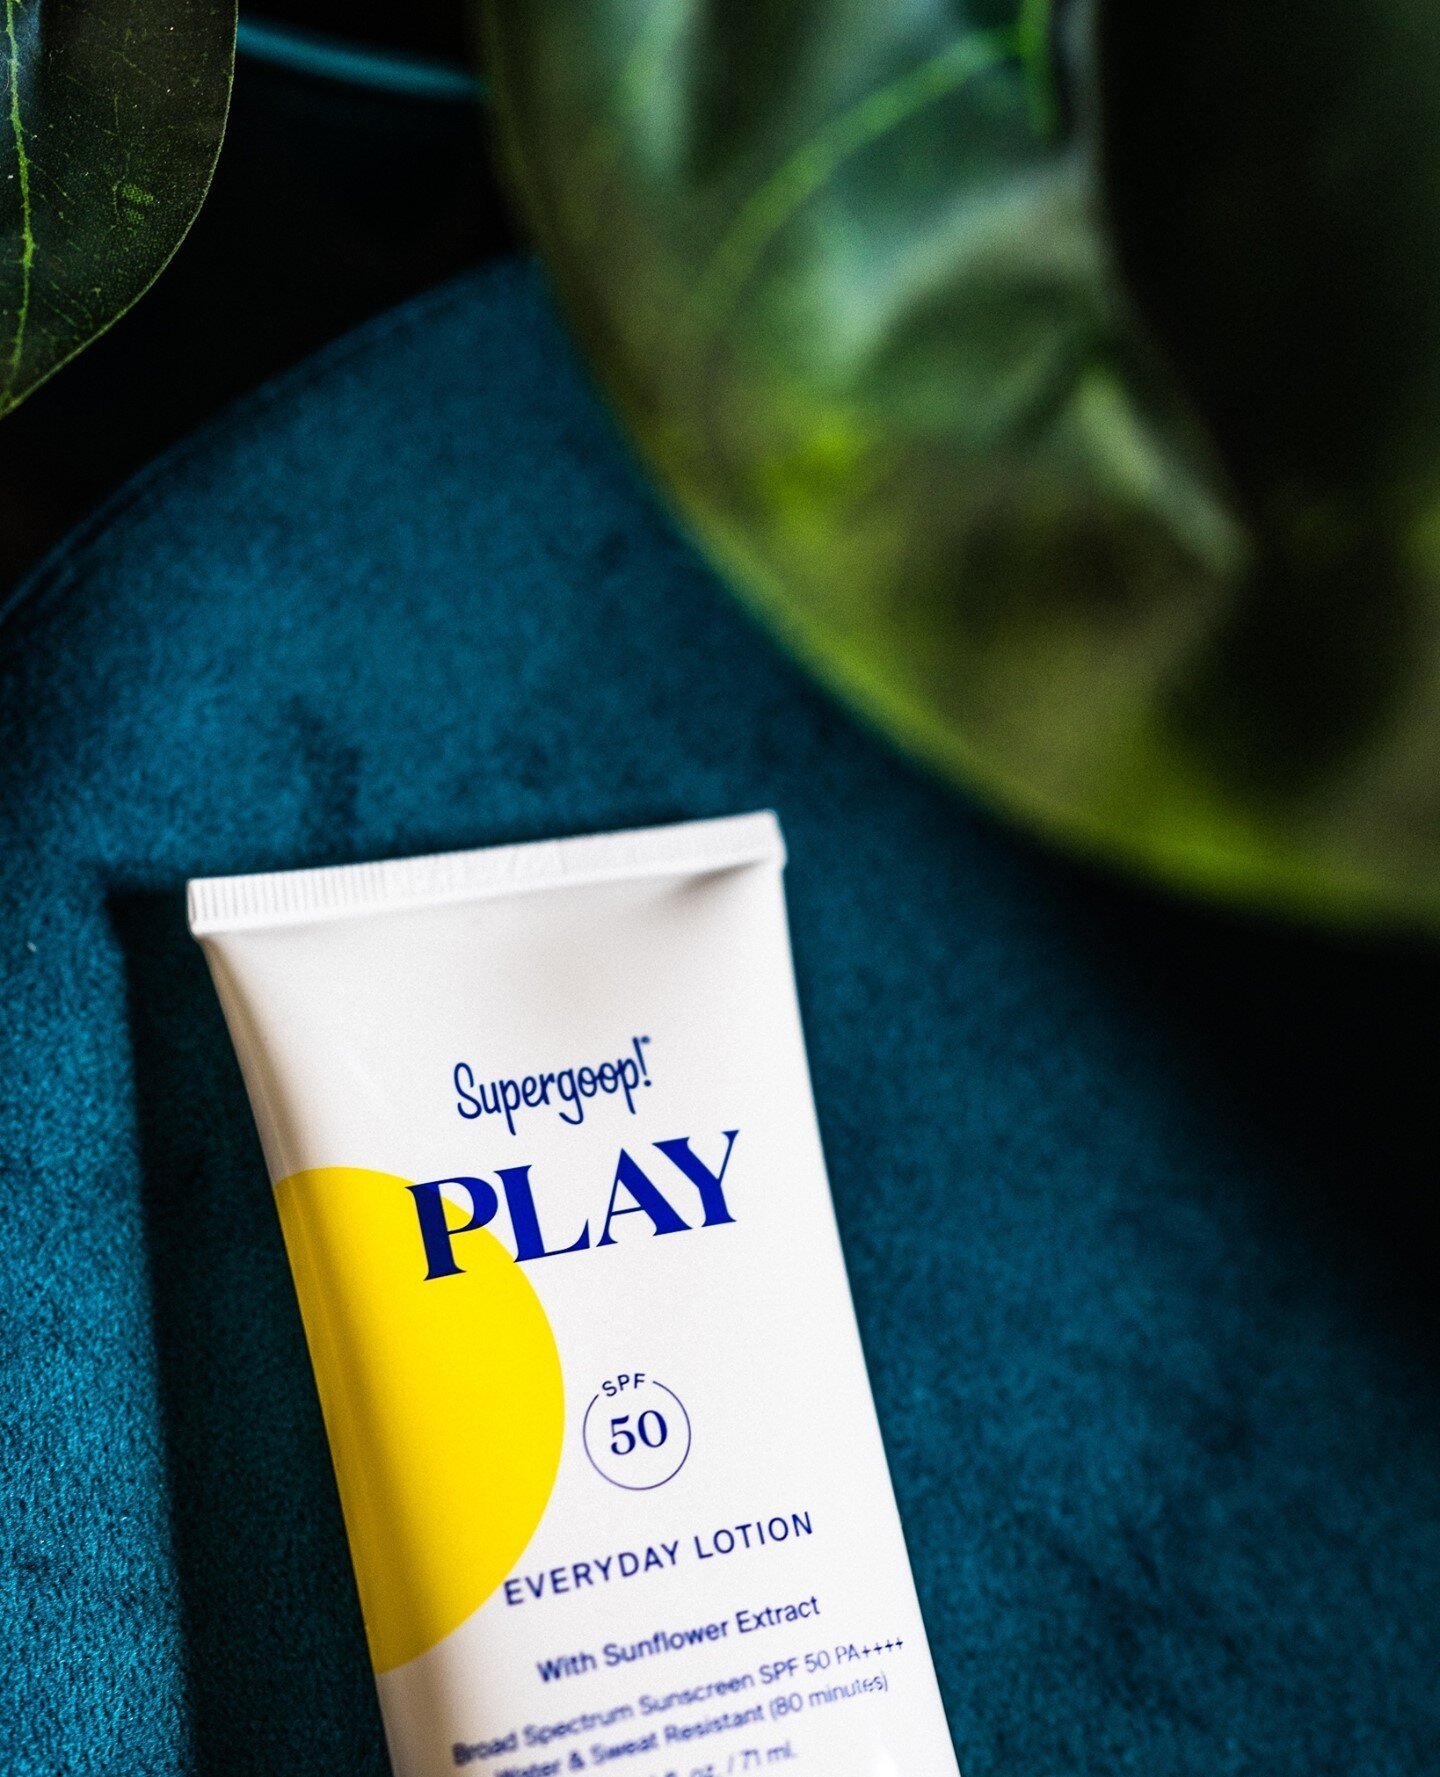 Just some super goop, super love, ⁠
⁠
Anyway, I have been meaning to try this sunscreen for probably about a year now and I have to say it's as good as everyone says it is. ⁠
⁠
It does have a sunscreen scent to it but that does fade quite quickly I r